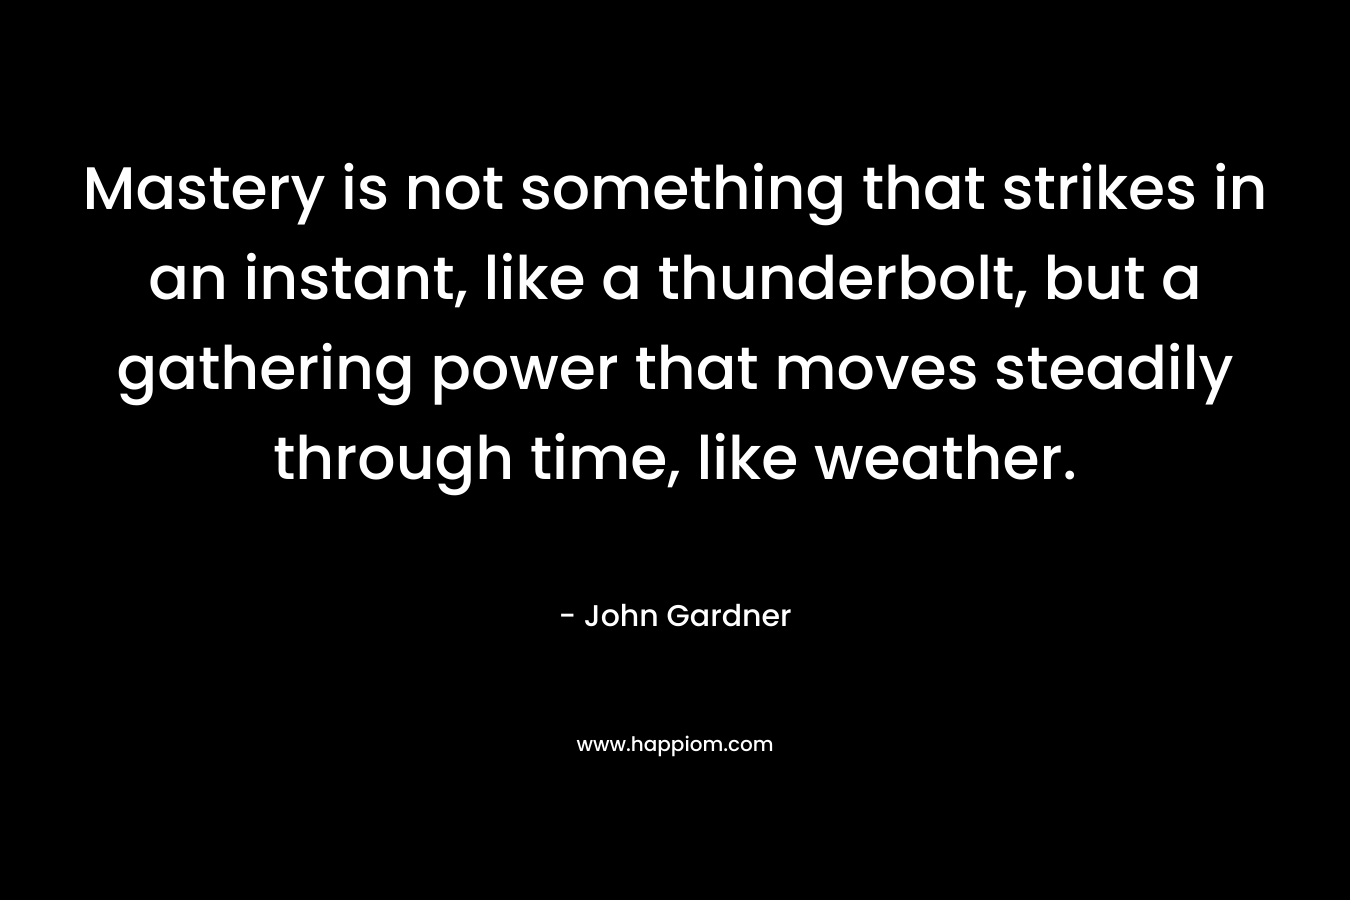 Mastery is not something that strikes in an instant, like a thunderbolt, but a gathering power that moves steadily through time, like weather. – John Gardner